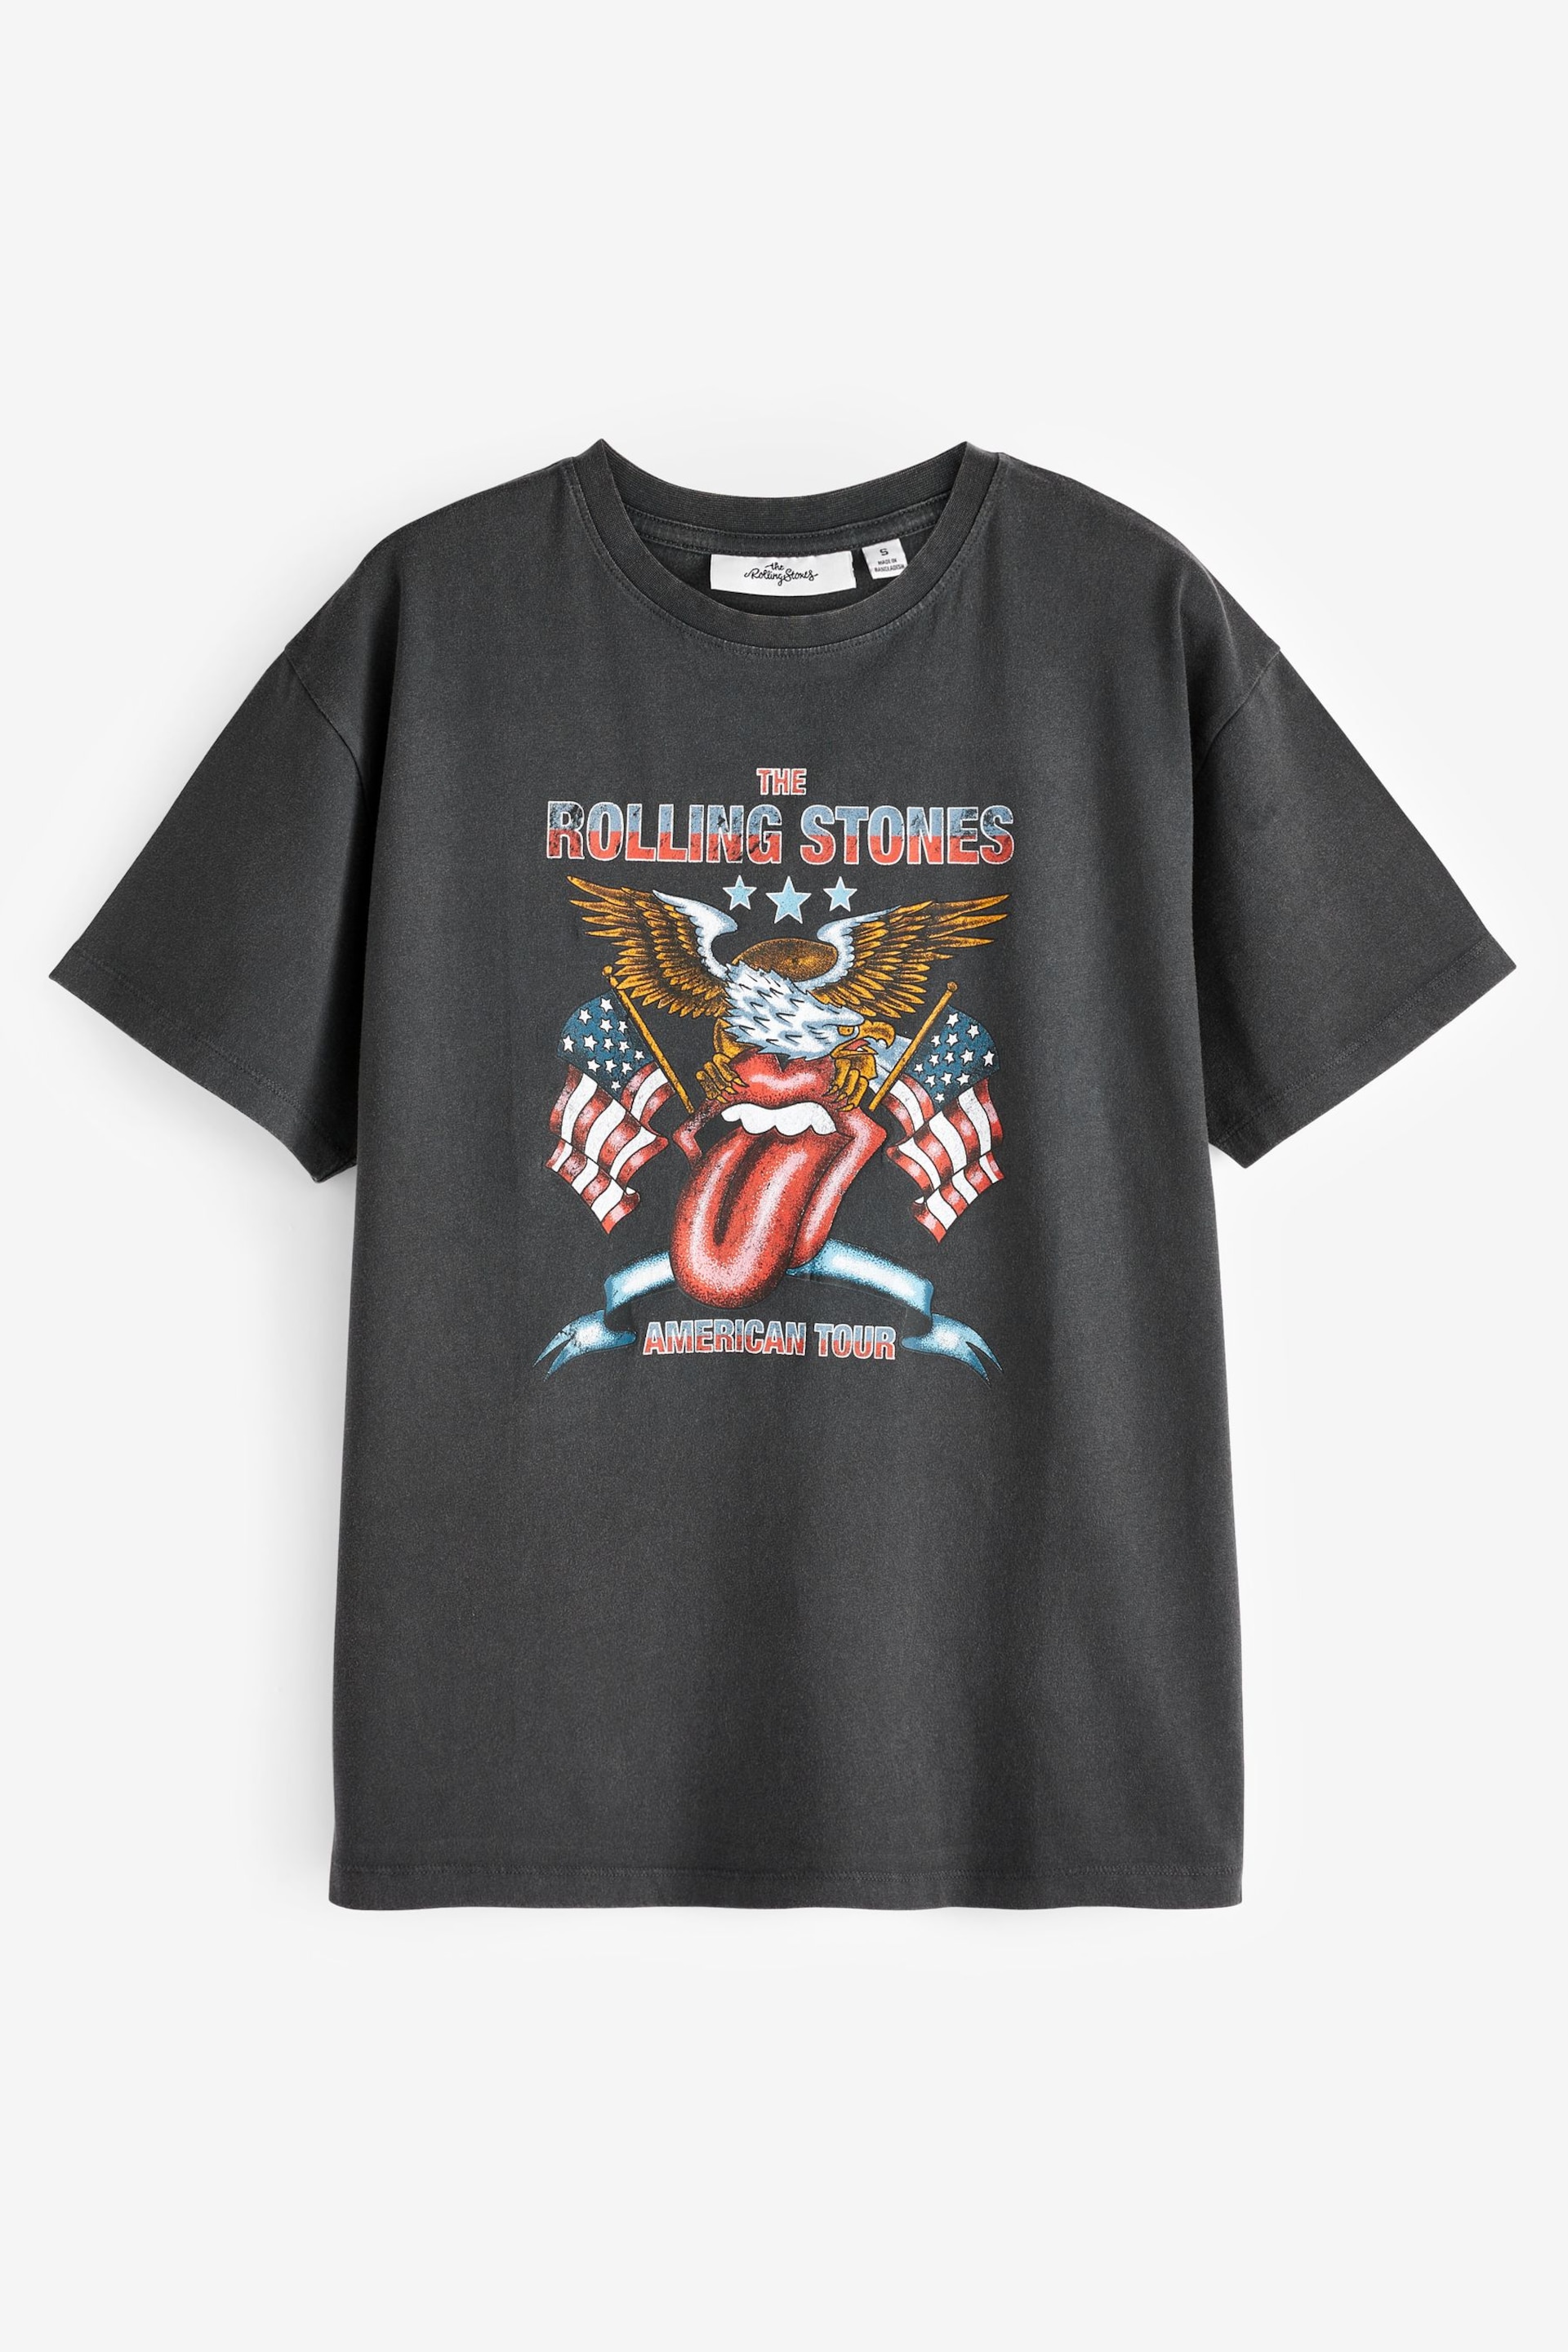 Charcoal Grey License Rolling Stones Band Graphic Short Sleeve T-Shirt - Image 5 of 6